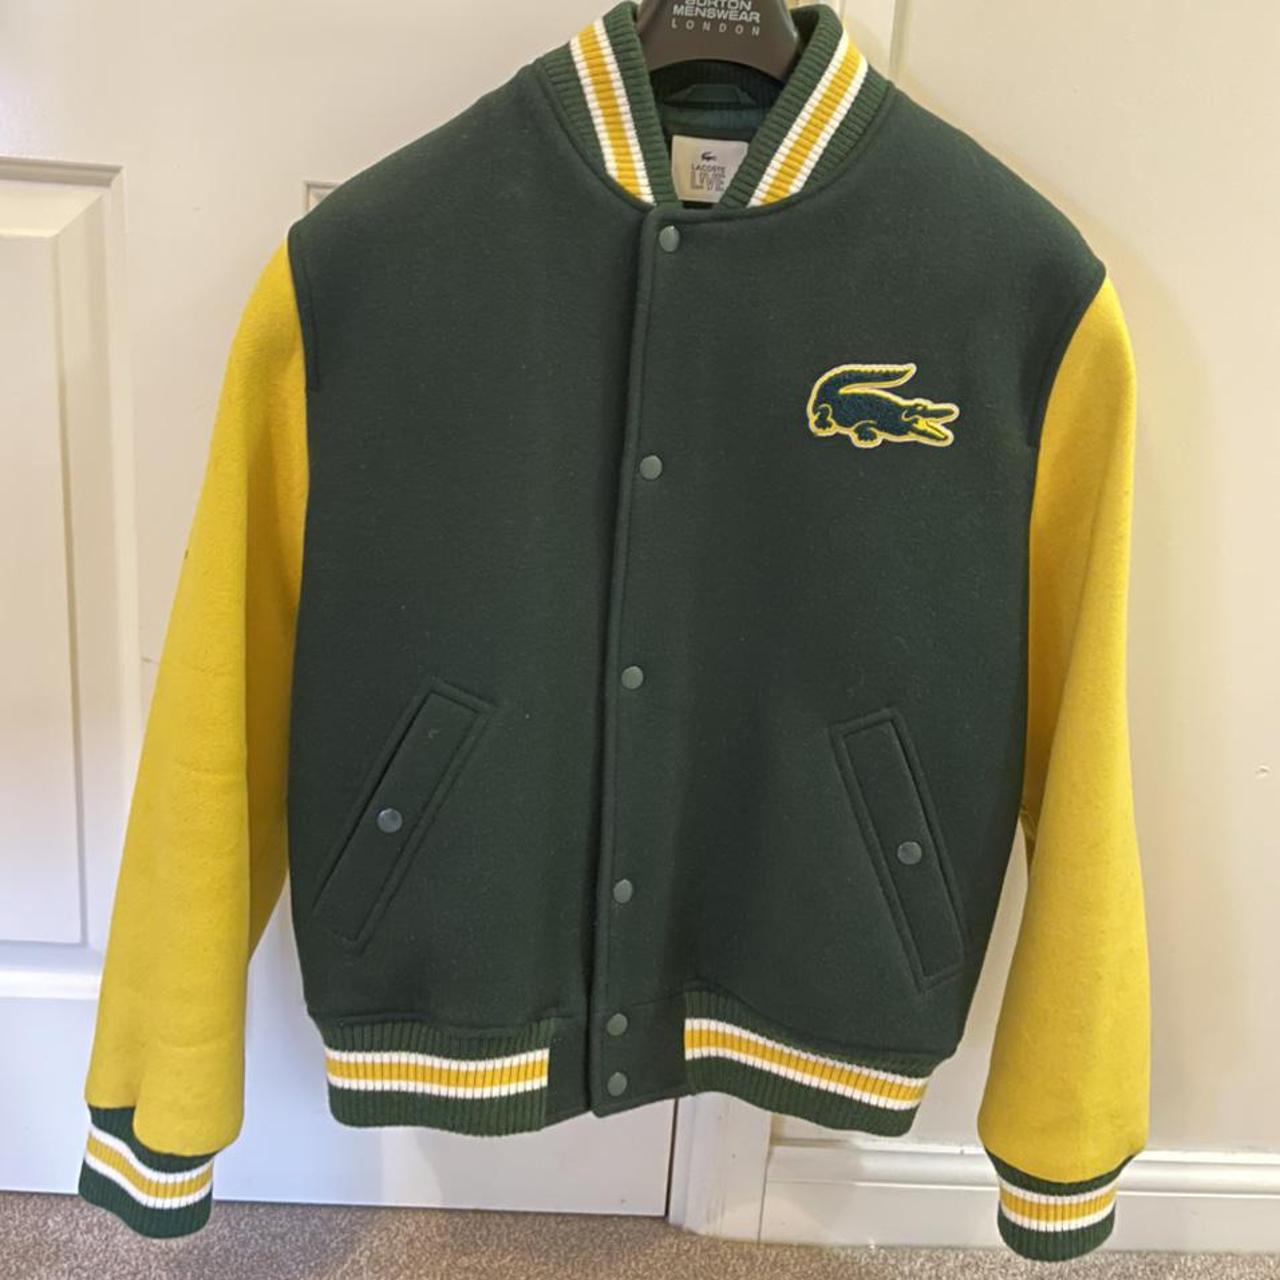 Lacoste Men's Green and Yellow Depop